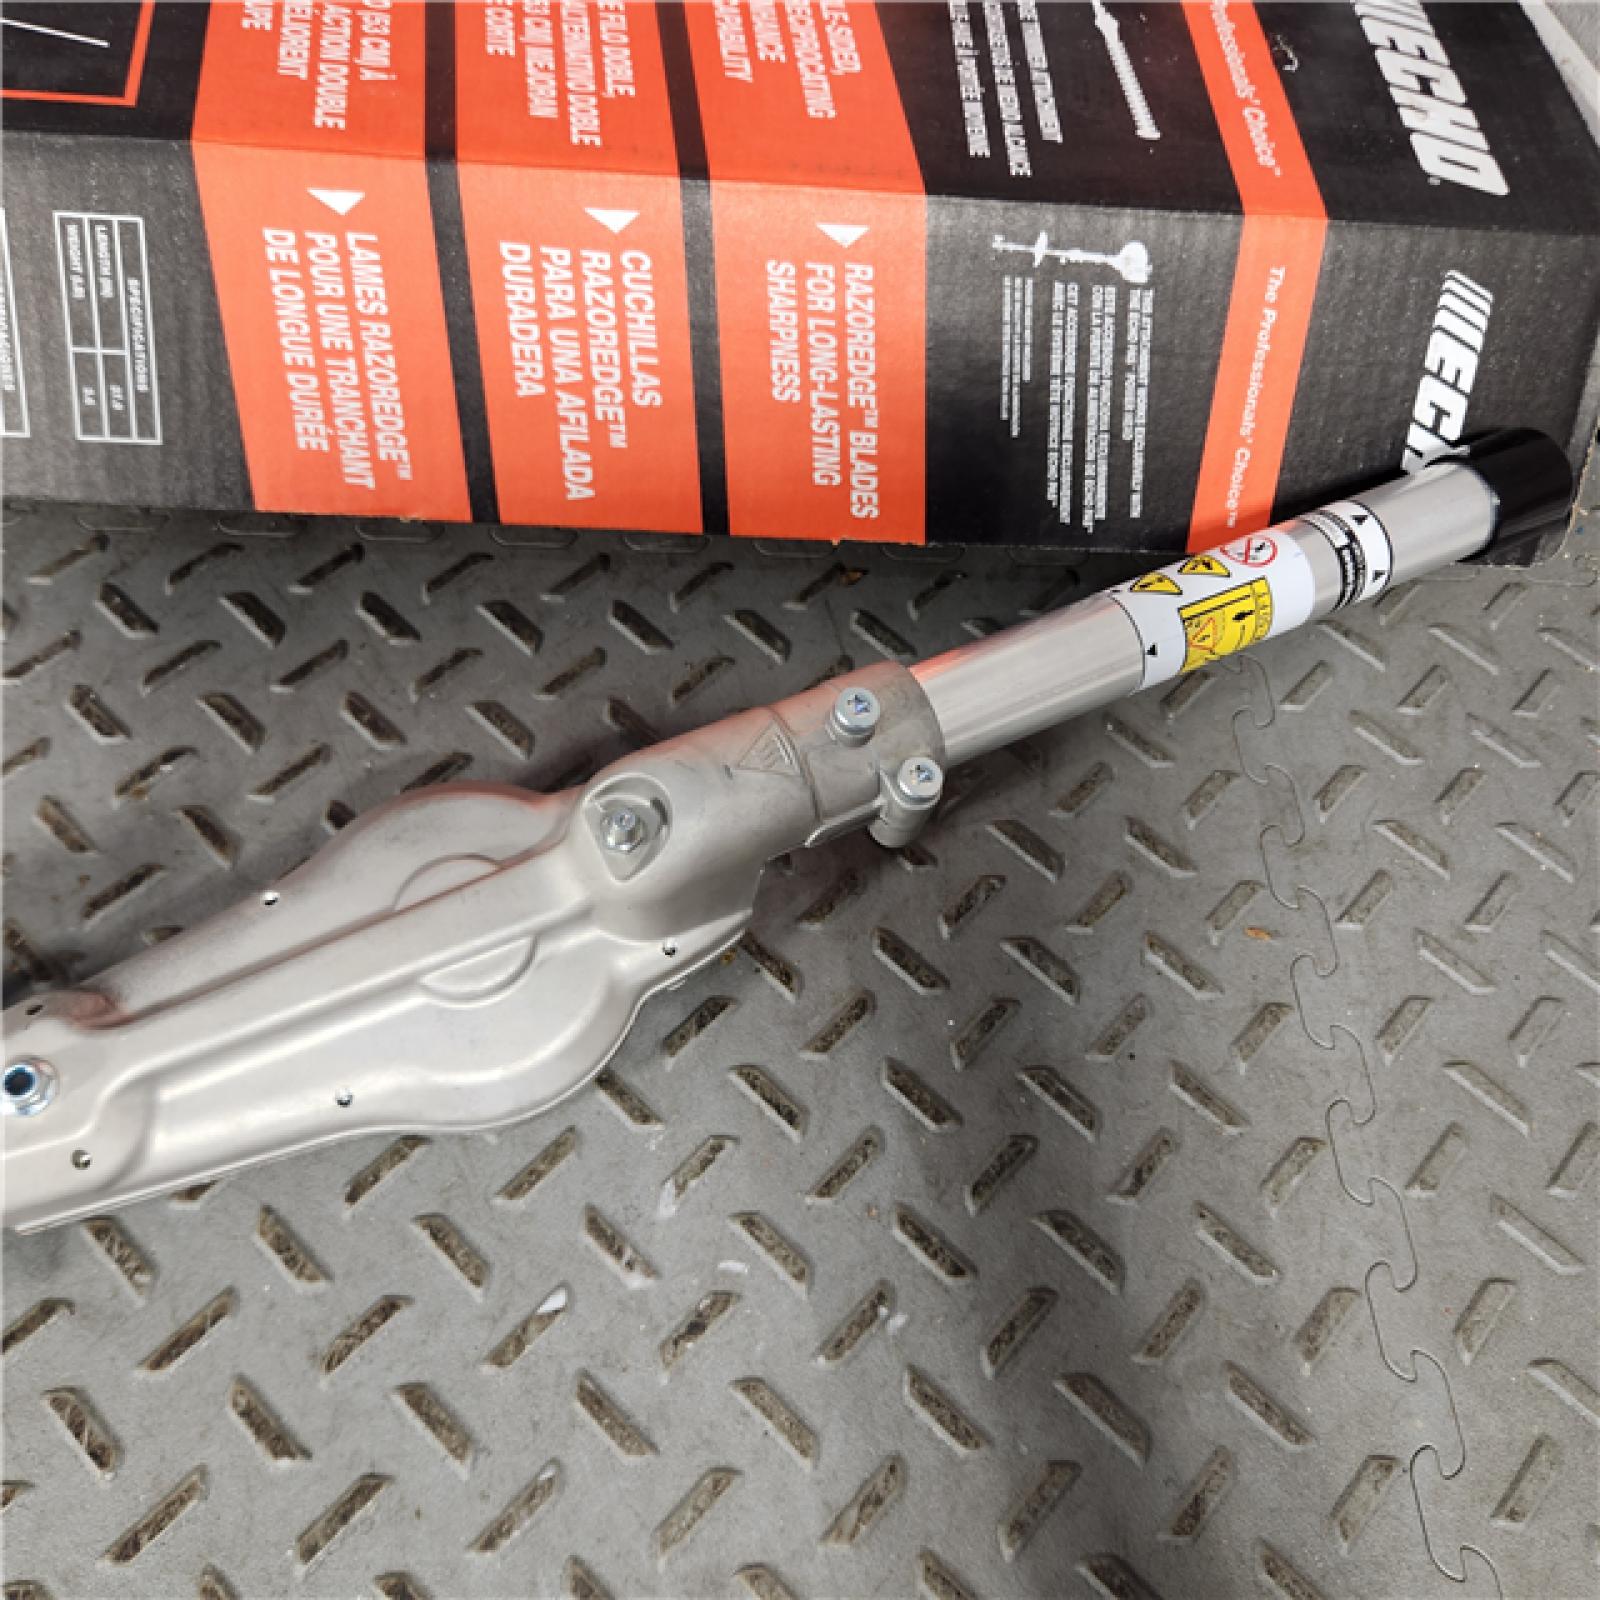 Houston Location - AS-IS ECHO 21 in. Mid-Reach Hedge Trimmer Attachment for Gas or Battery Pro Attachment Series (QUANTY 5) - Appears IN NEW Condition